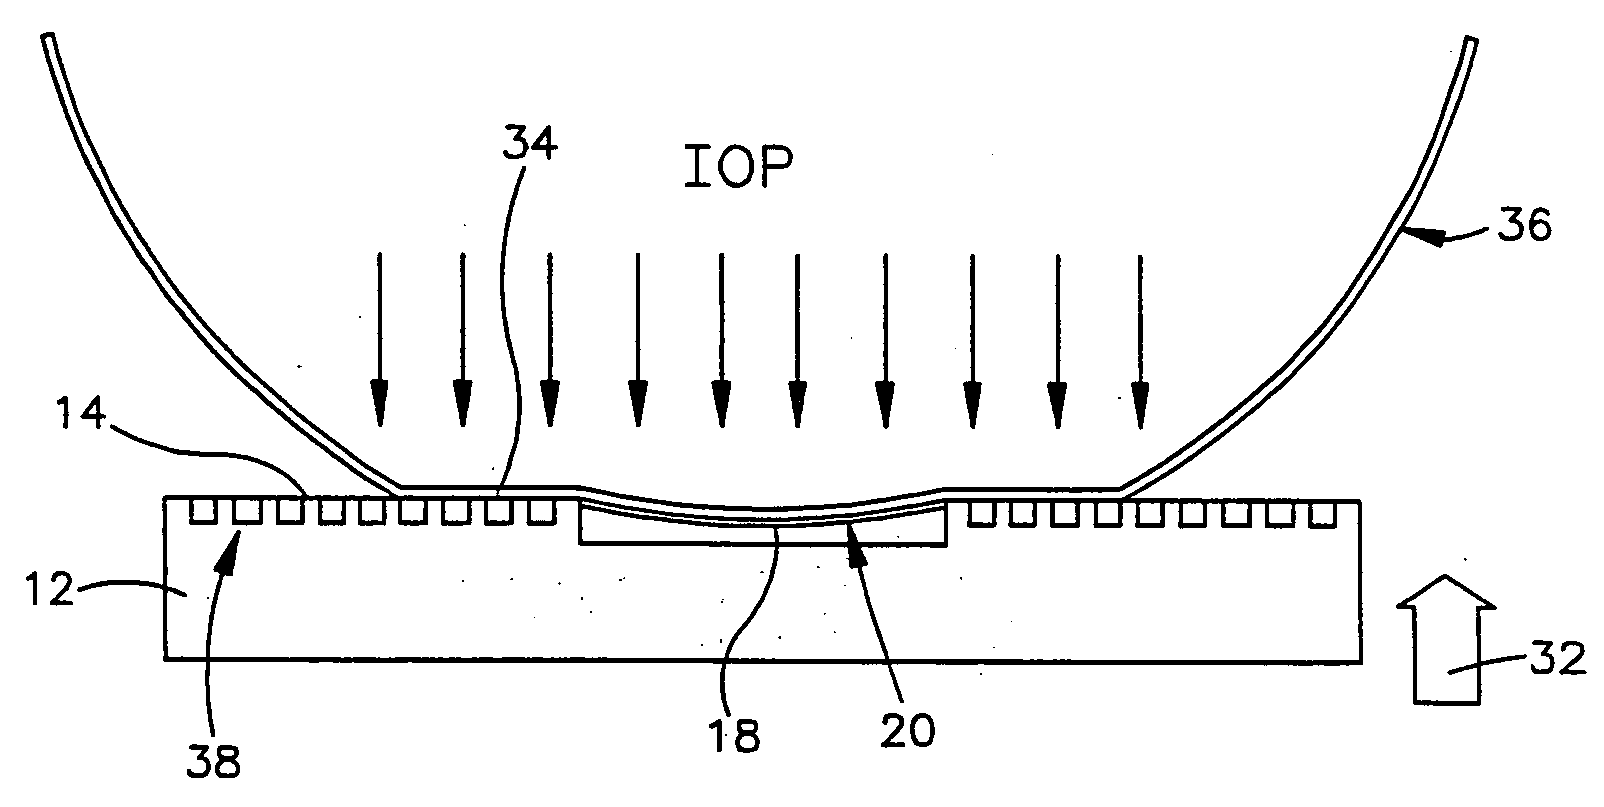 Intraocular pressure measurement system including a sensor mounted in a contact lens